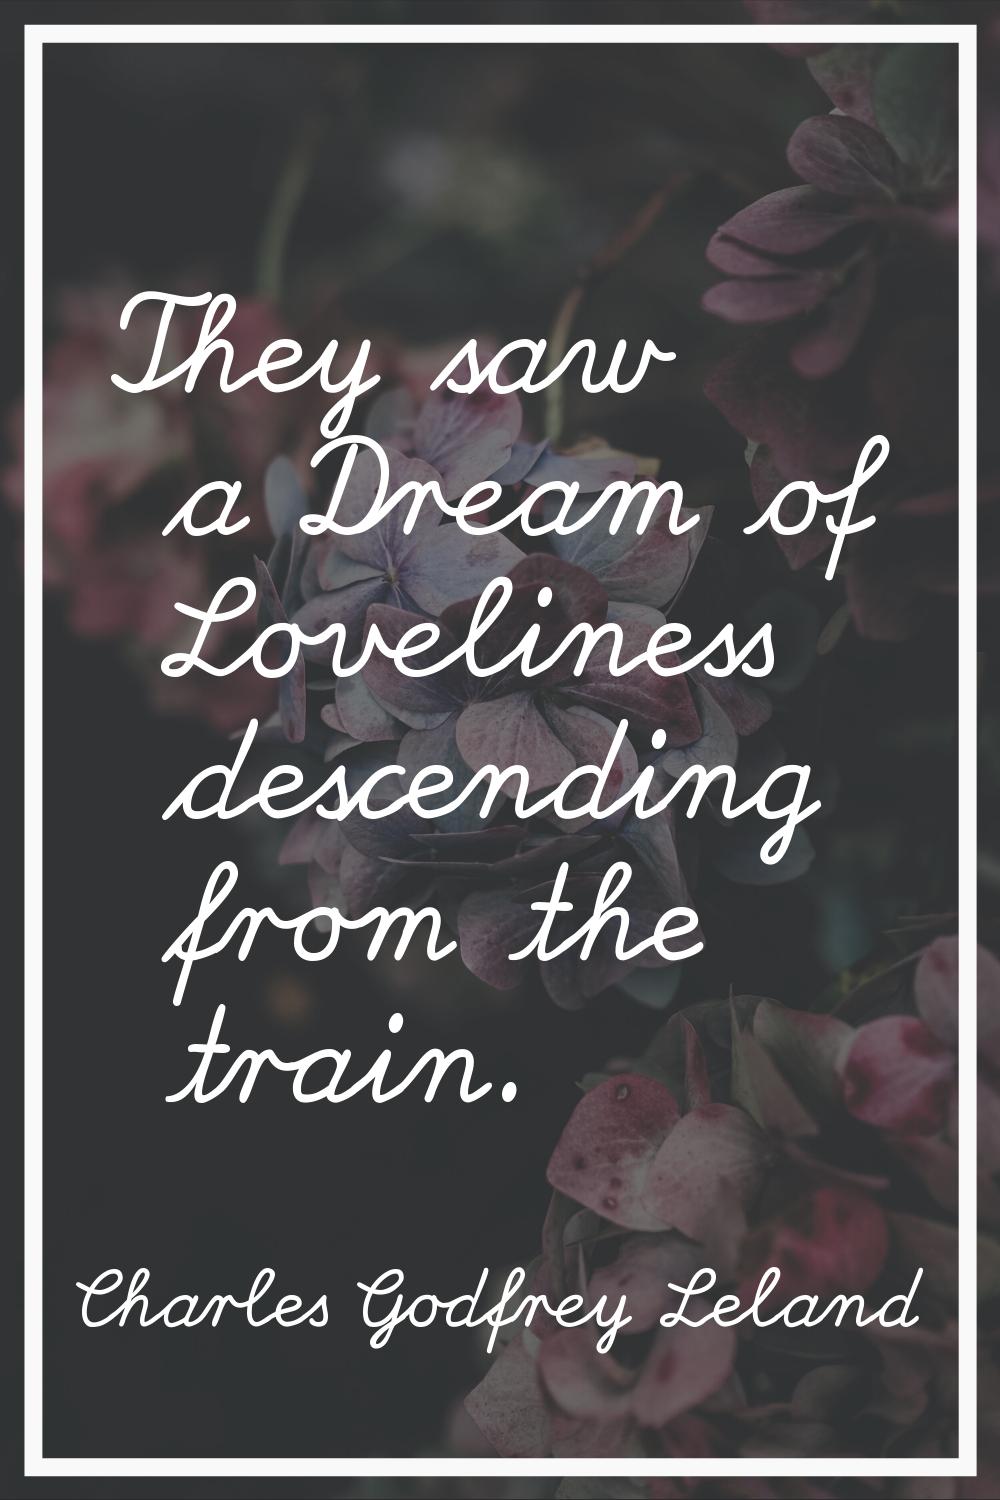 They saw a Dream of Loveliness descending from the train.